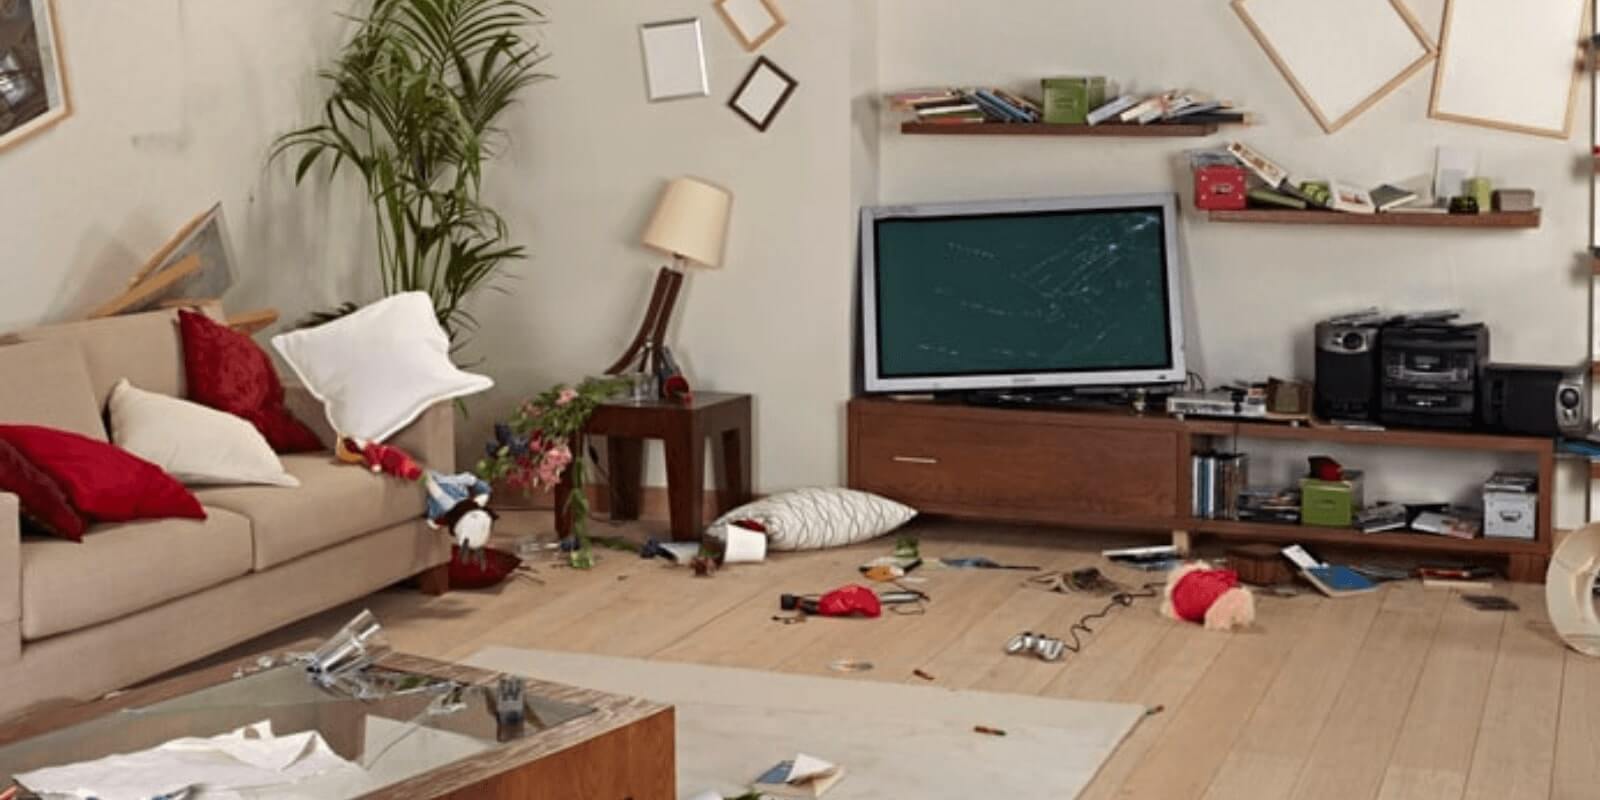 living room that has a broken tv and broken items all over the floor